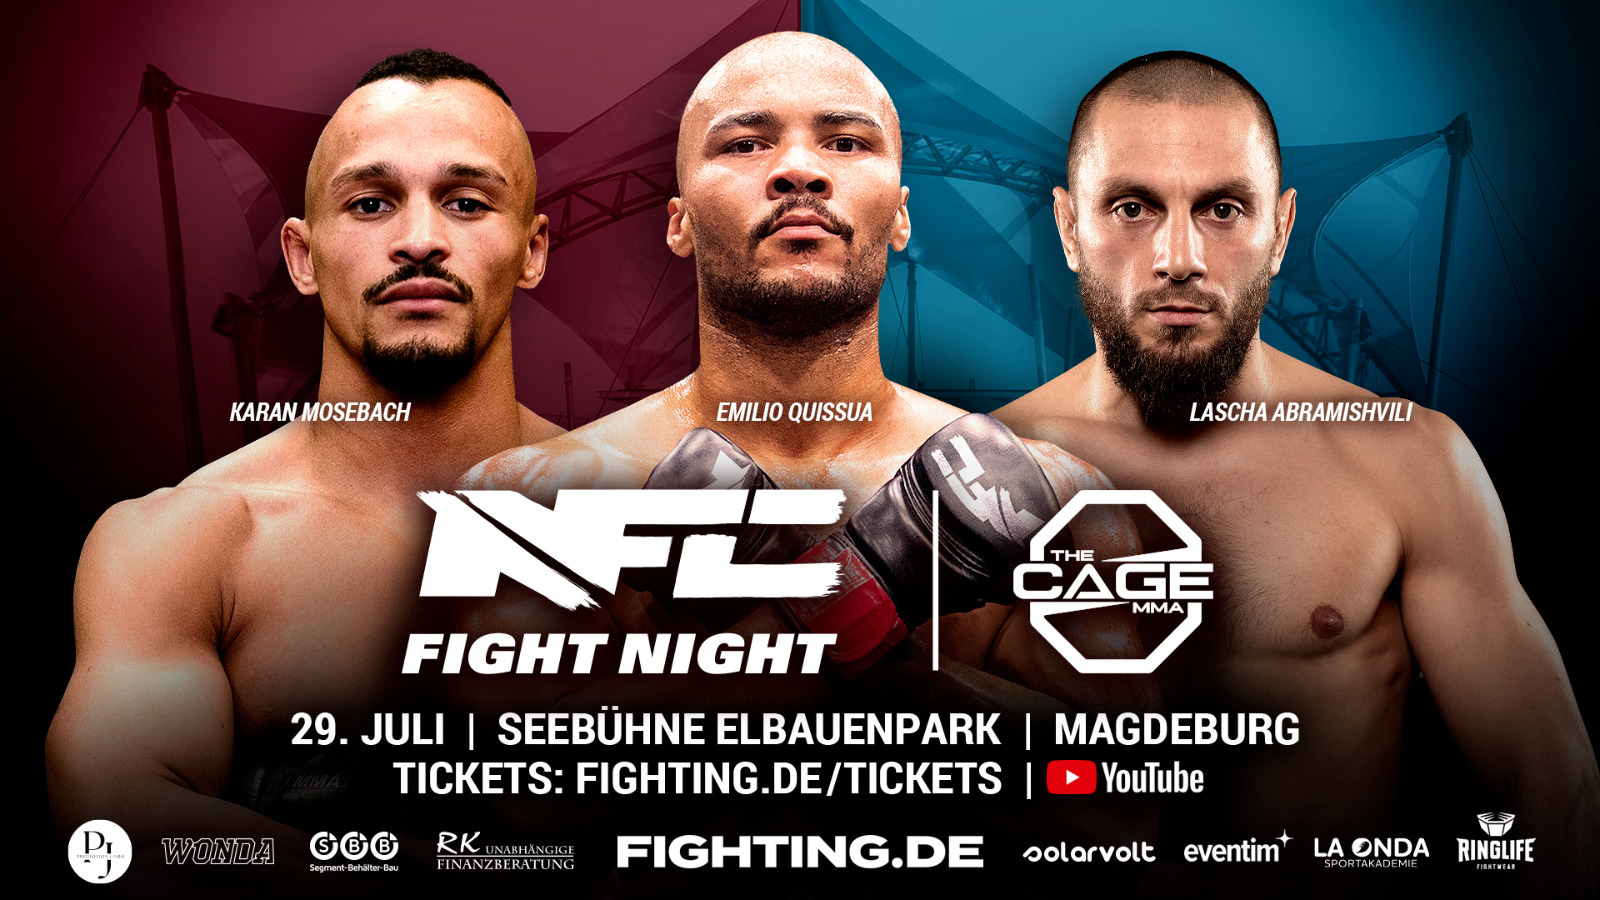 nfc-fight-night-x-the-cage